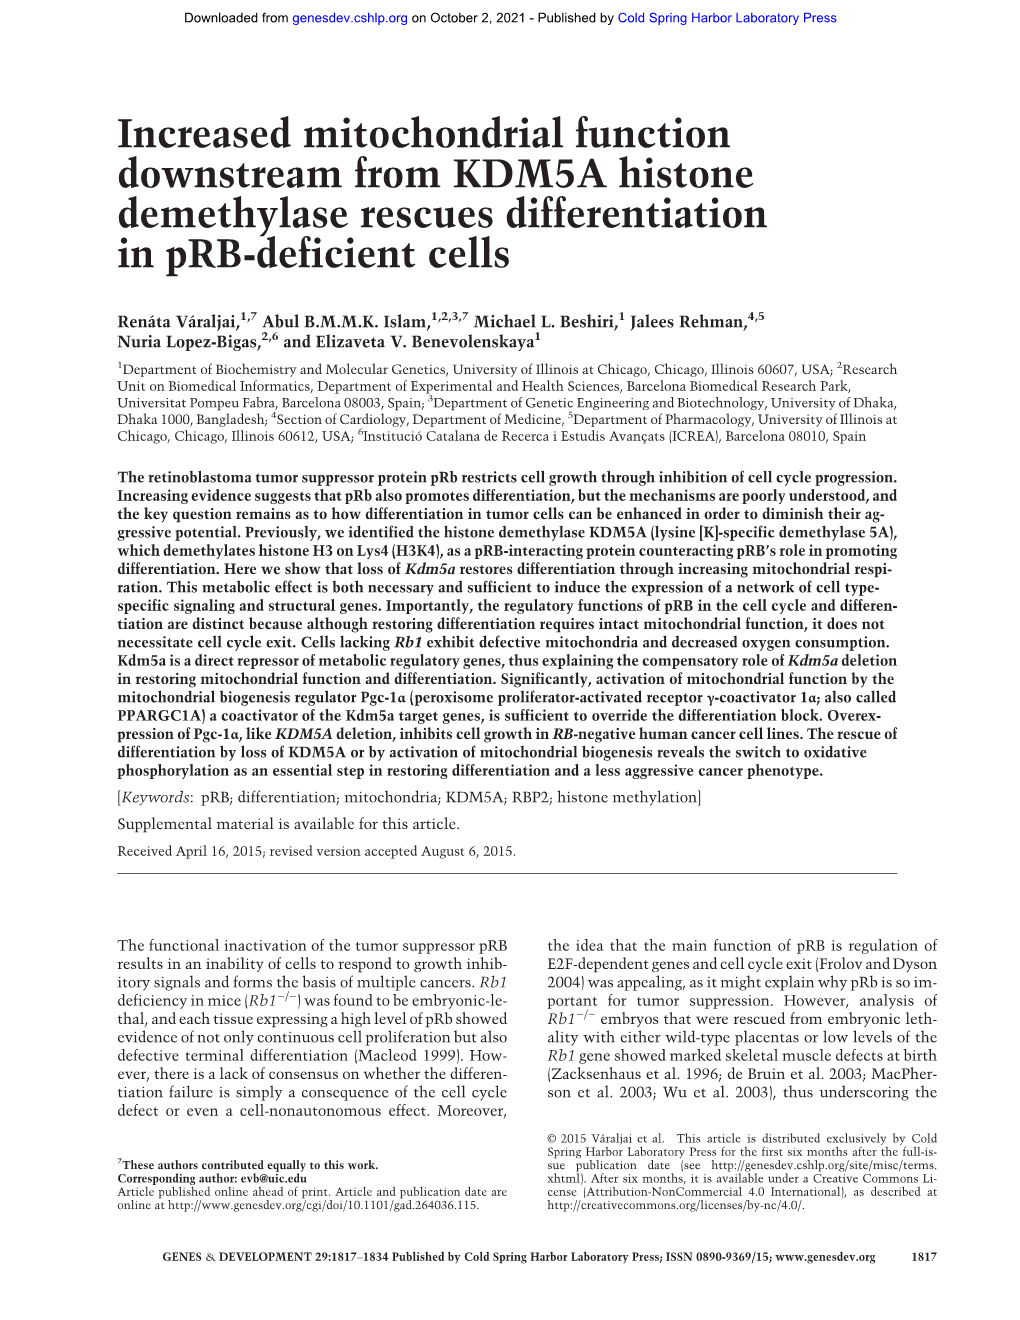 Increased Mitochondrial Function Downstream from KDM5A Histone Demethylase Rescues Differentiation in Prb-Deficient Cells